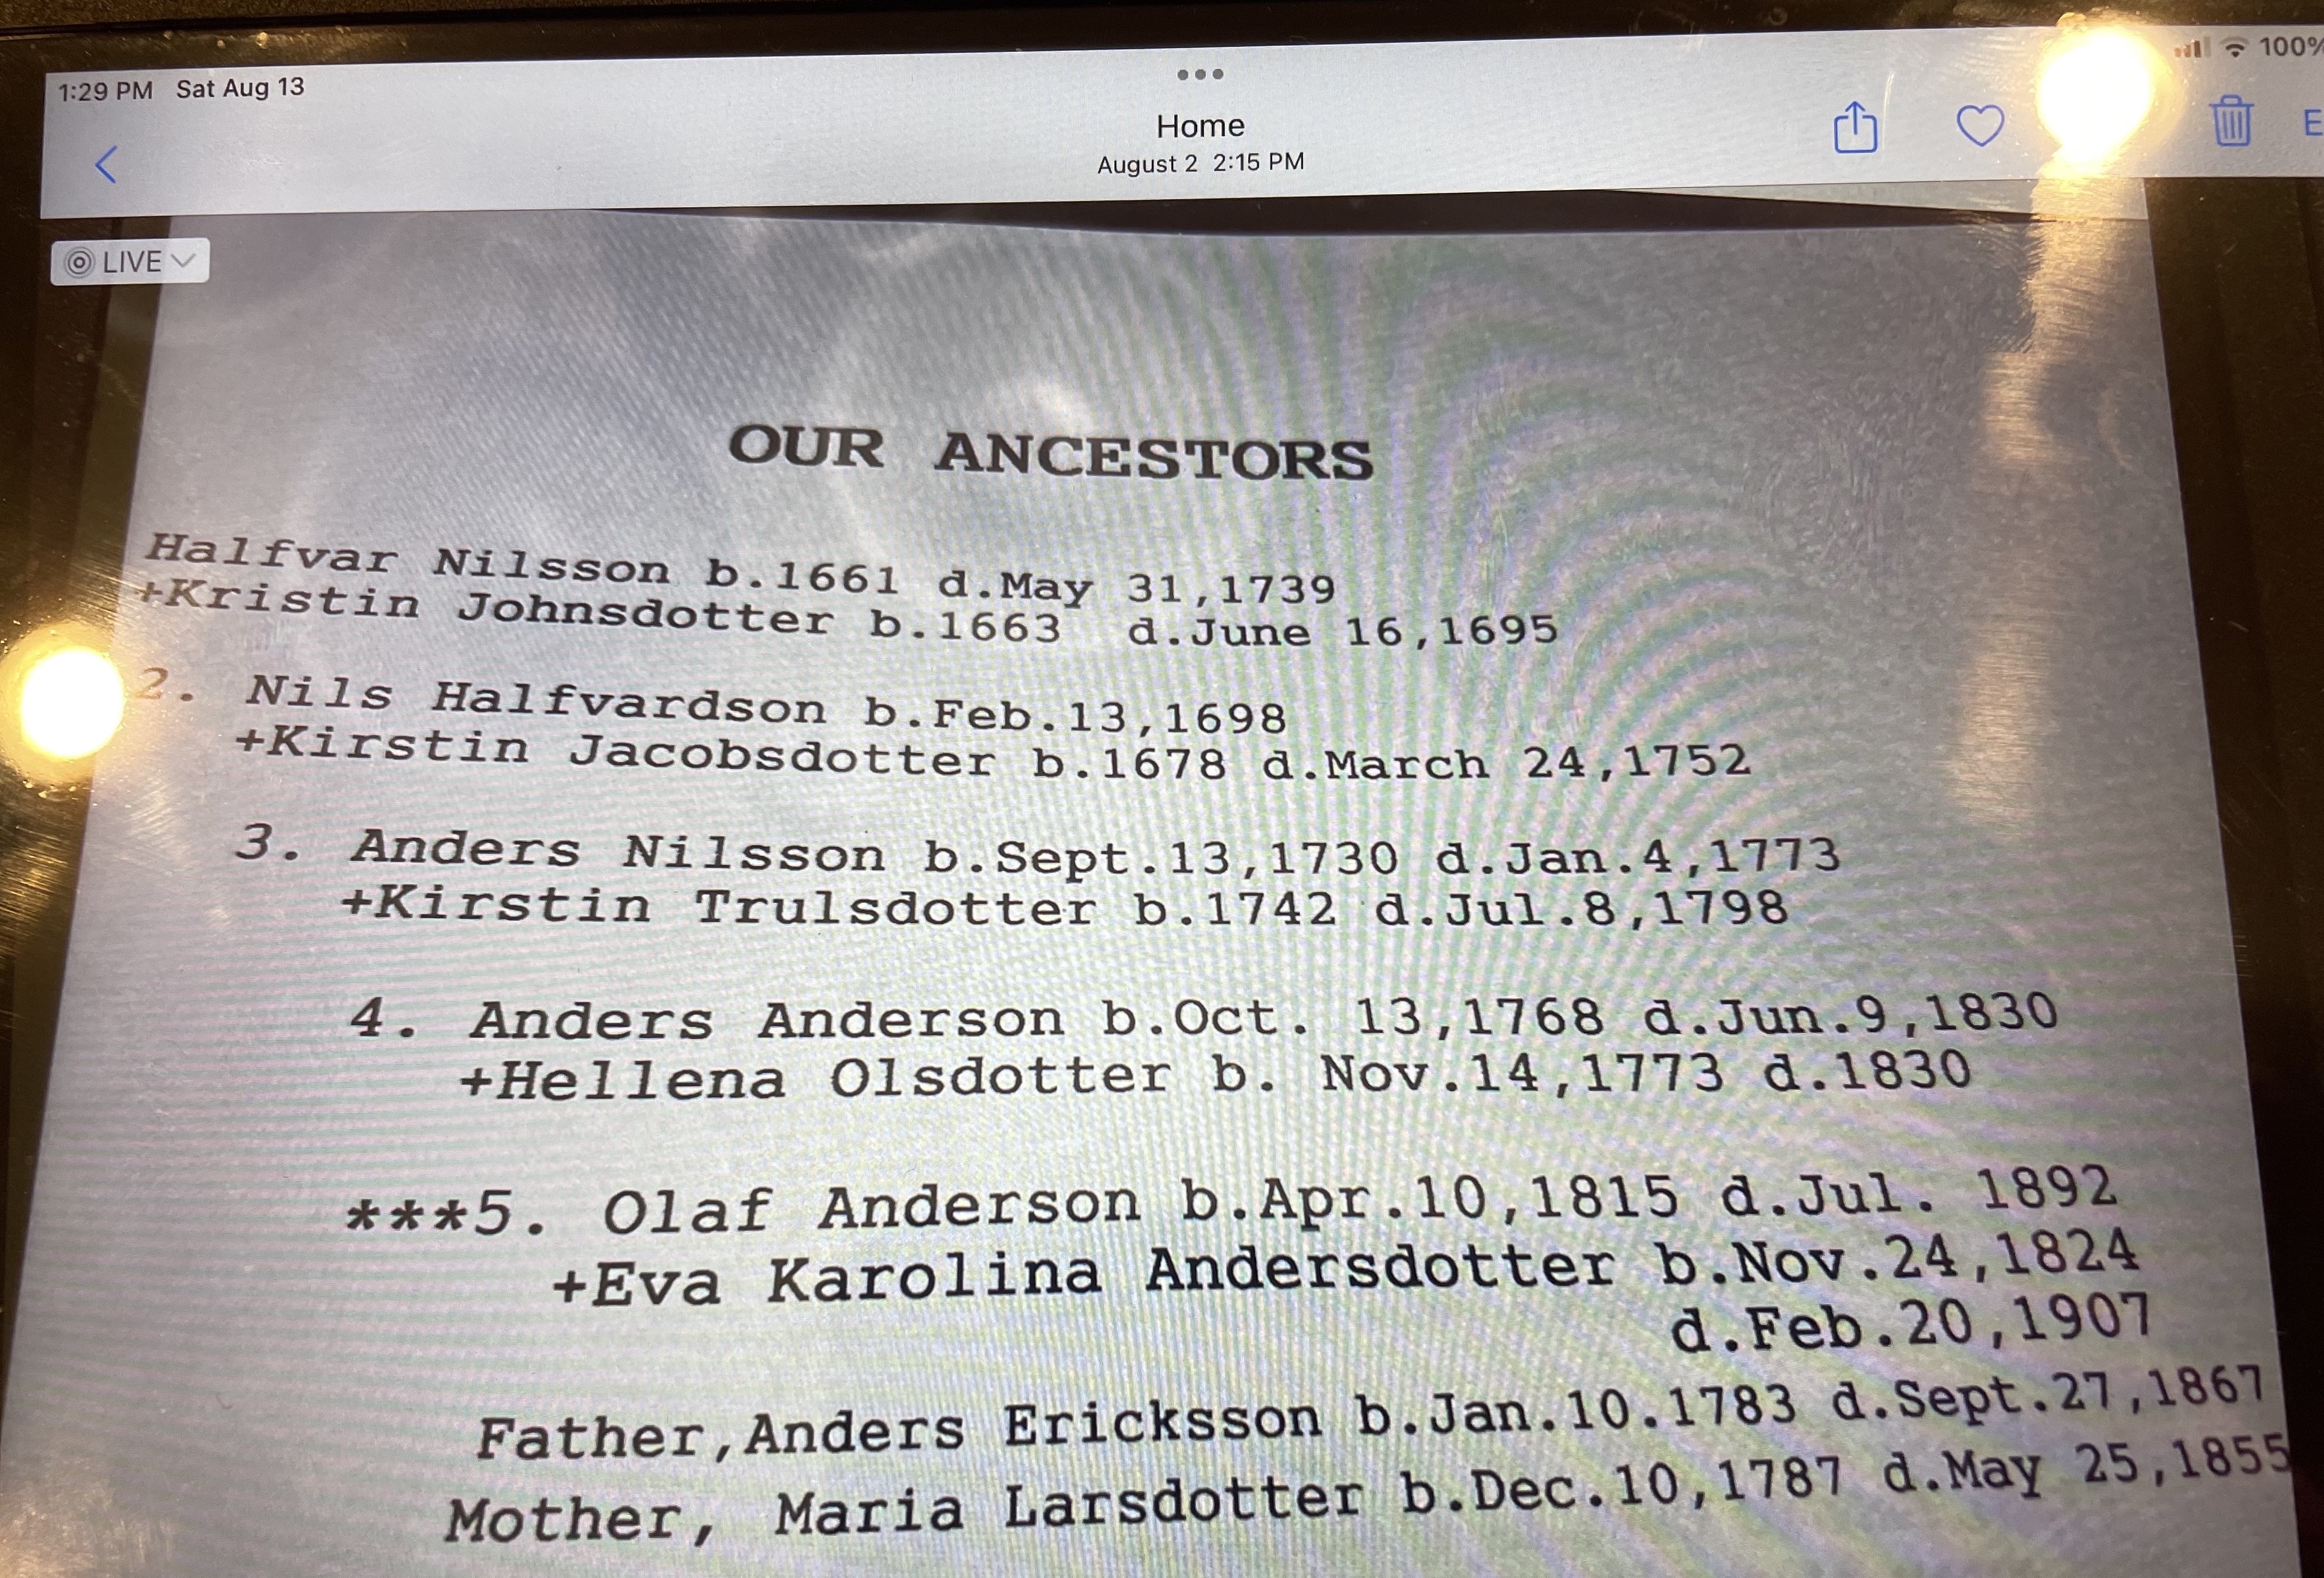 A listing of possible male ancestors of Olof Andersson